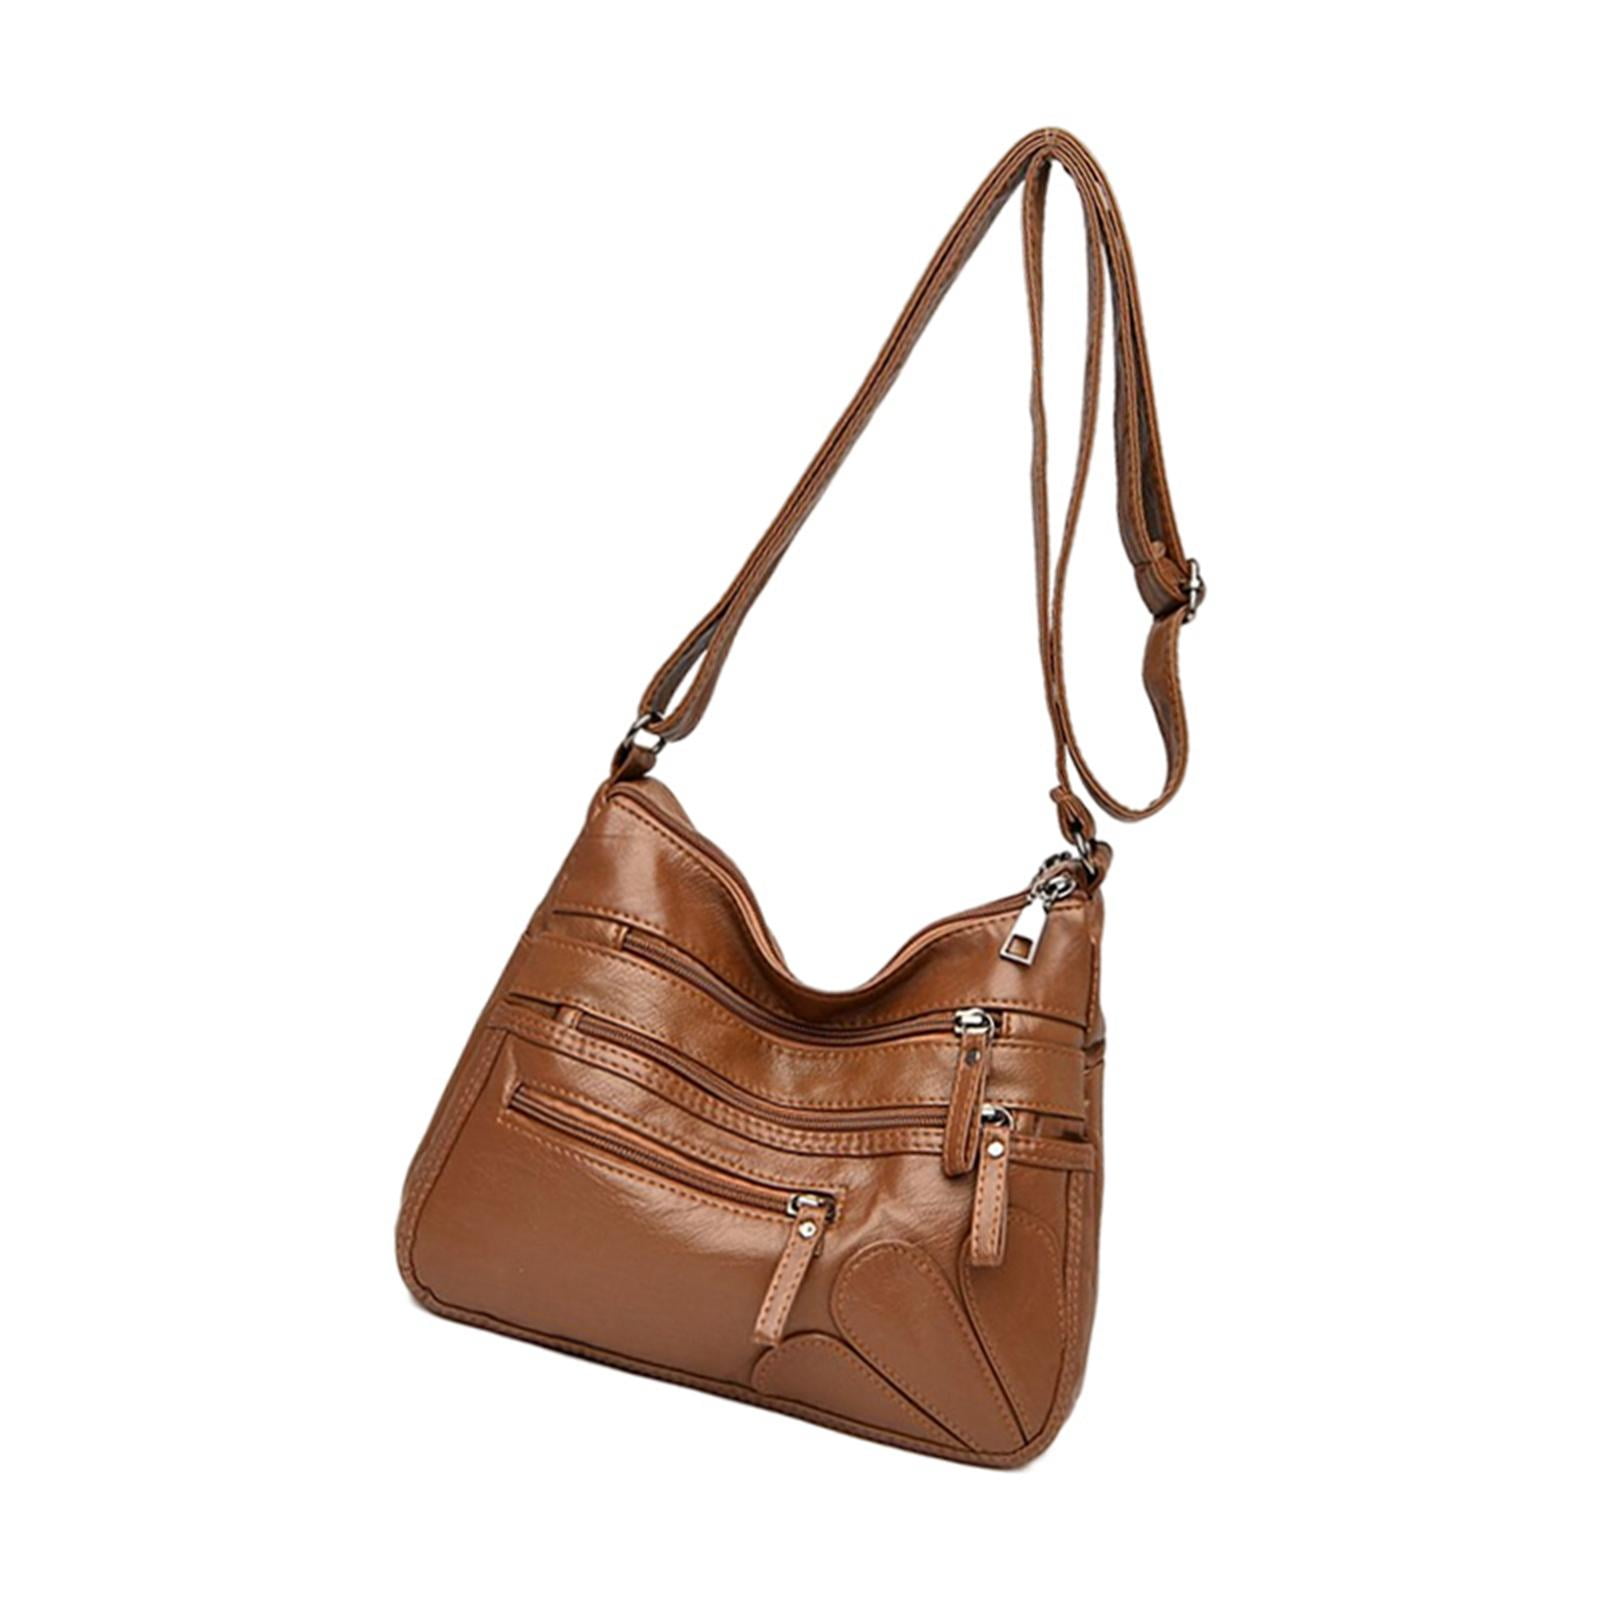 Shoulder bag leather – How to match it to look best